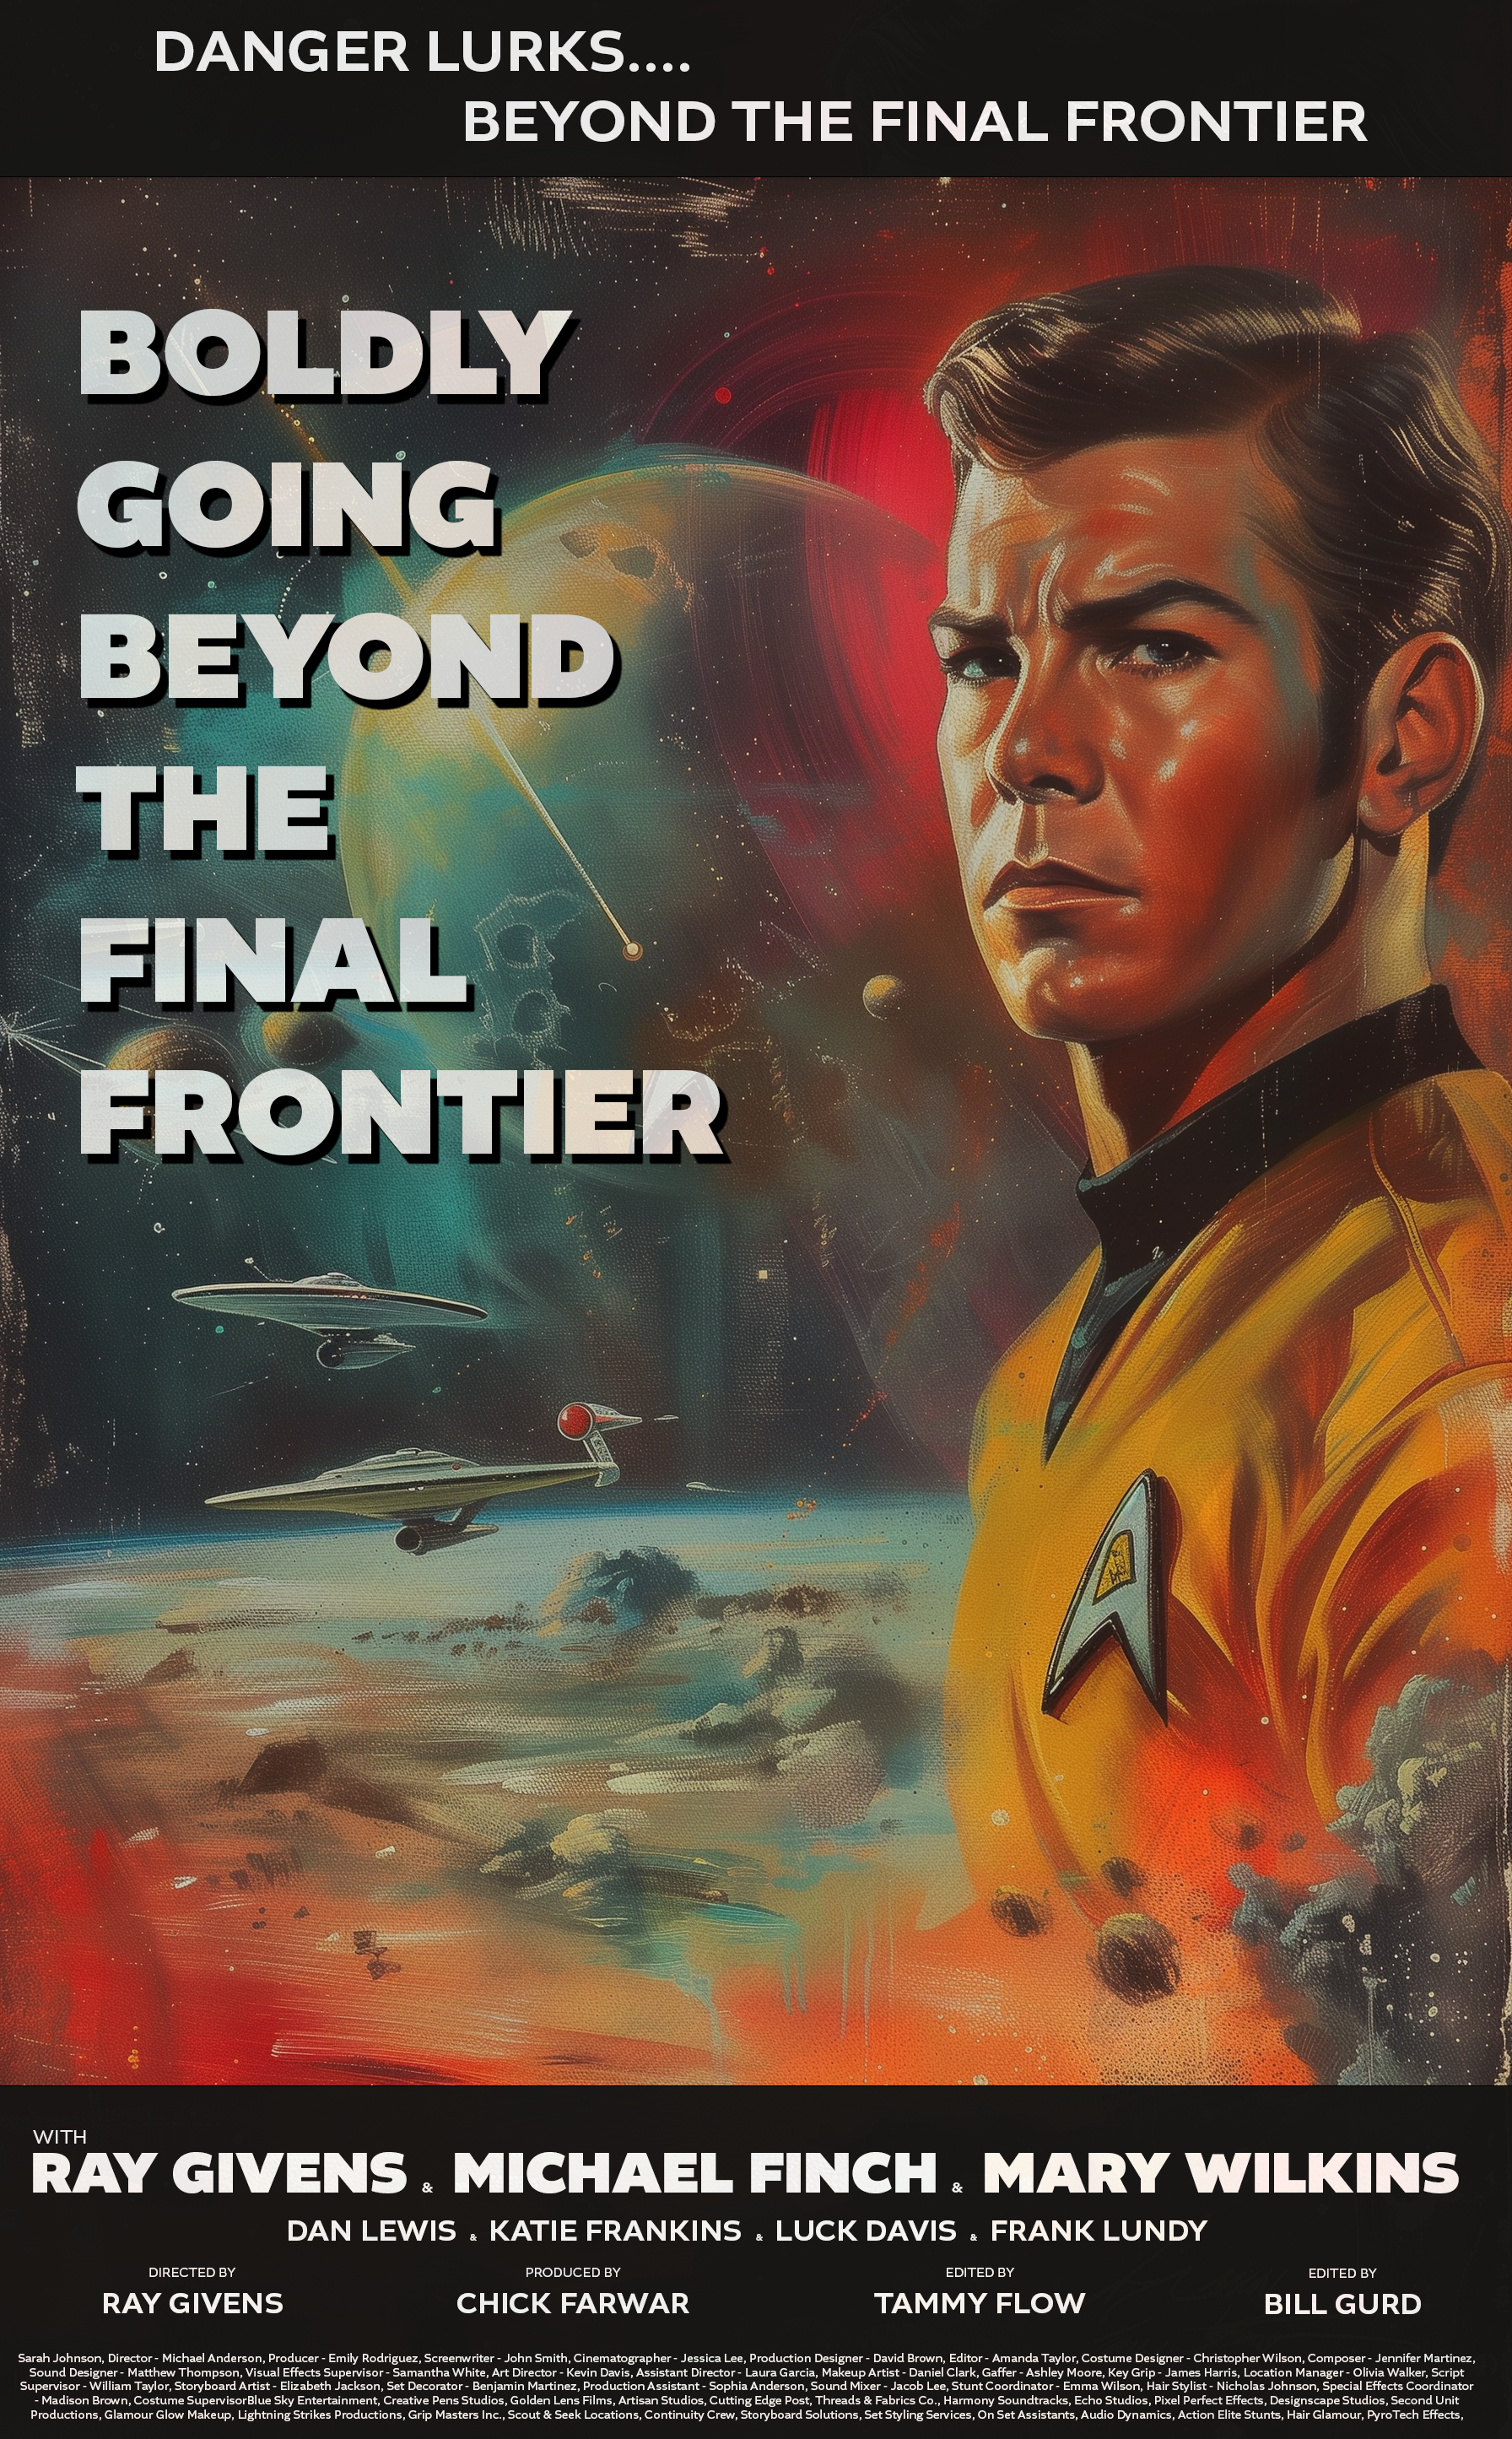 Name:  Beyond the Final Frontier.png
Views: 148
Size:  8.19 MB